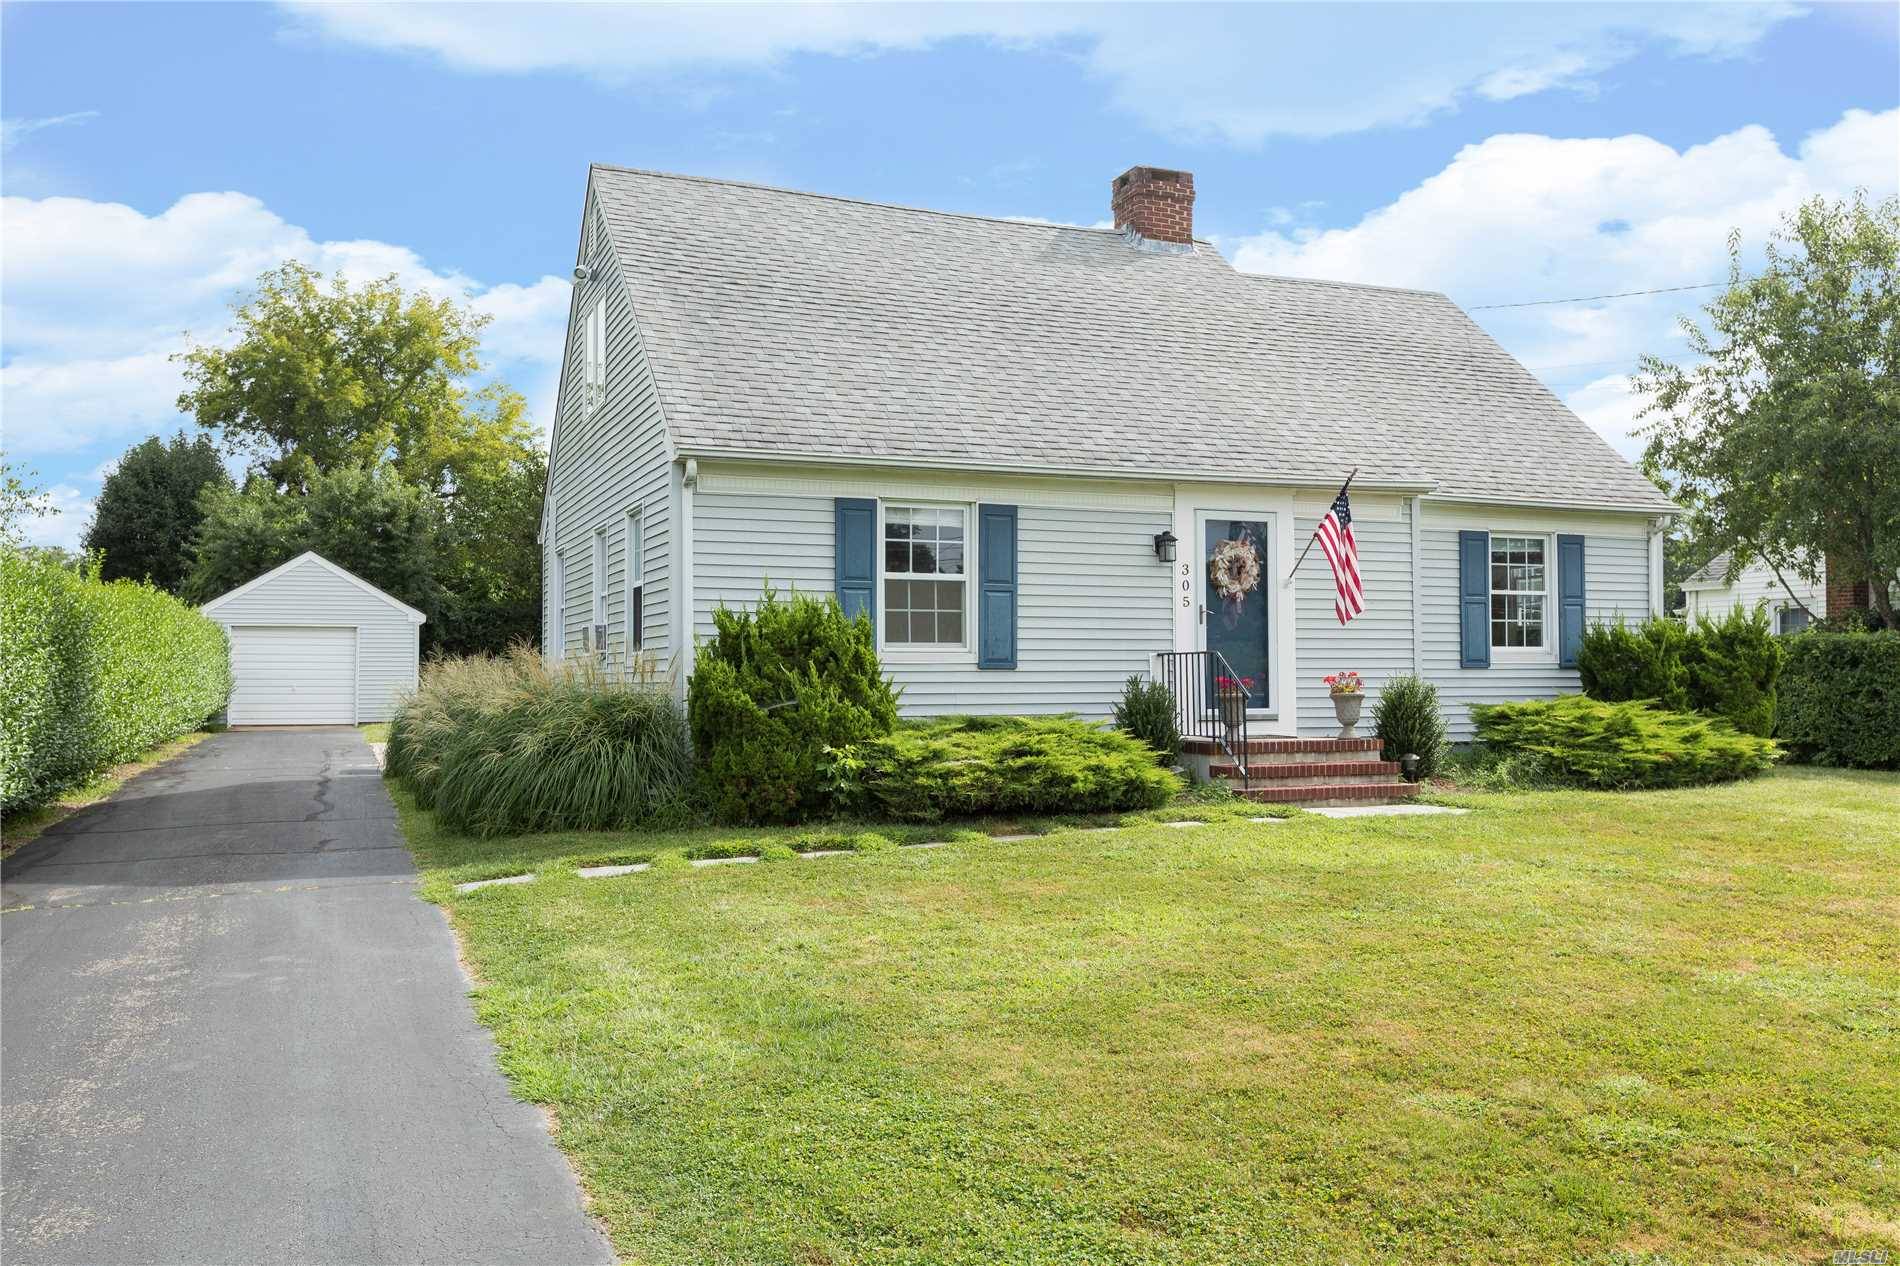 Recently Renovated 4 Bedroom 2 Bathroom Cape In Sought After Community In Southold.